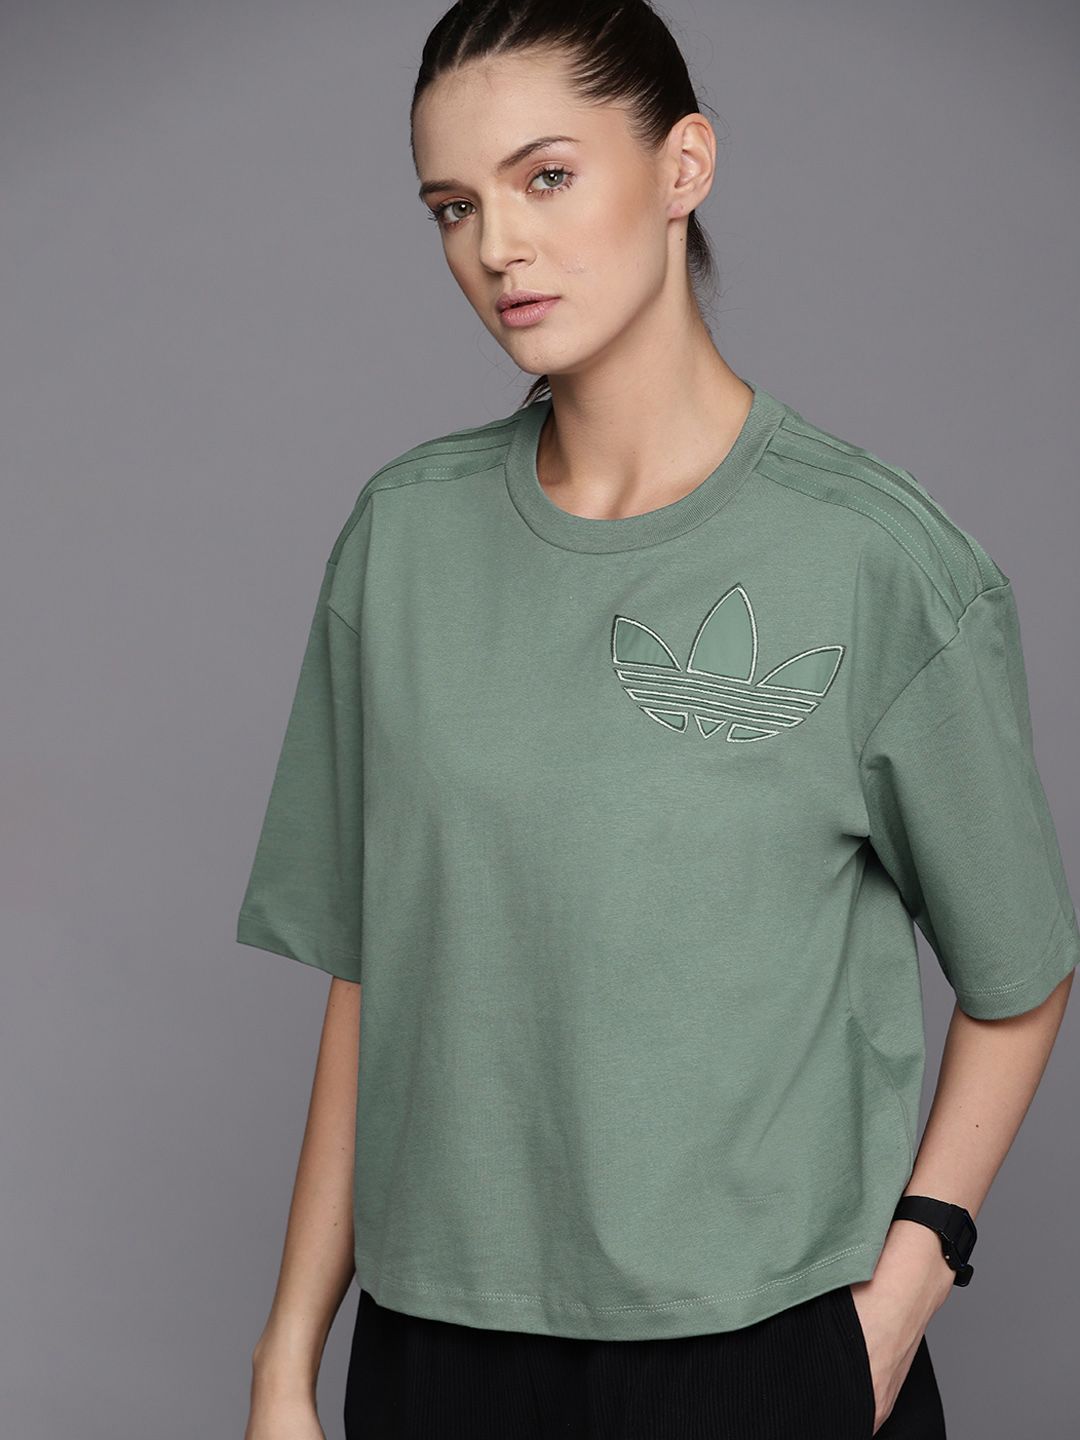 ADIDAS Originals Women Green Solid Pure Cotton Loose Trefoil Patch T-shirt Price in India